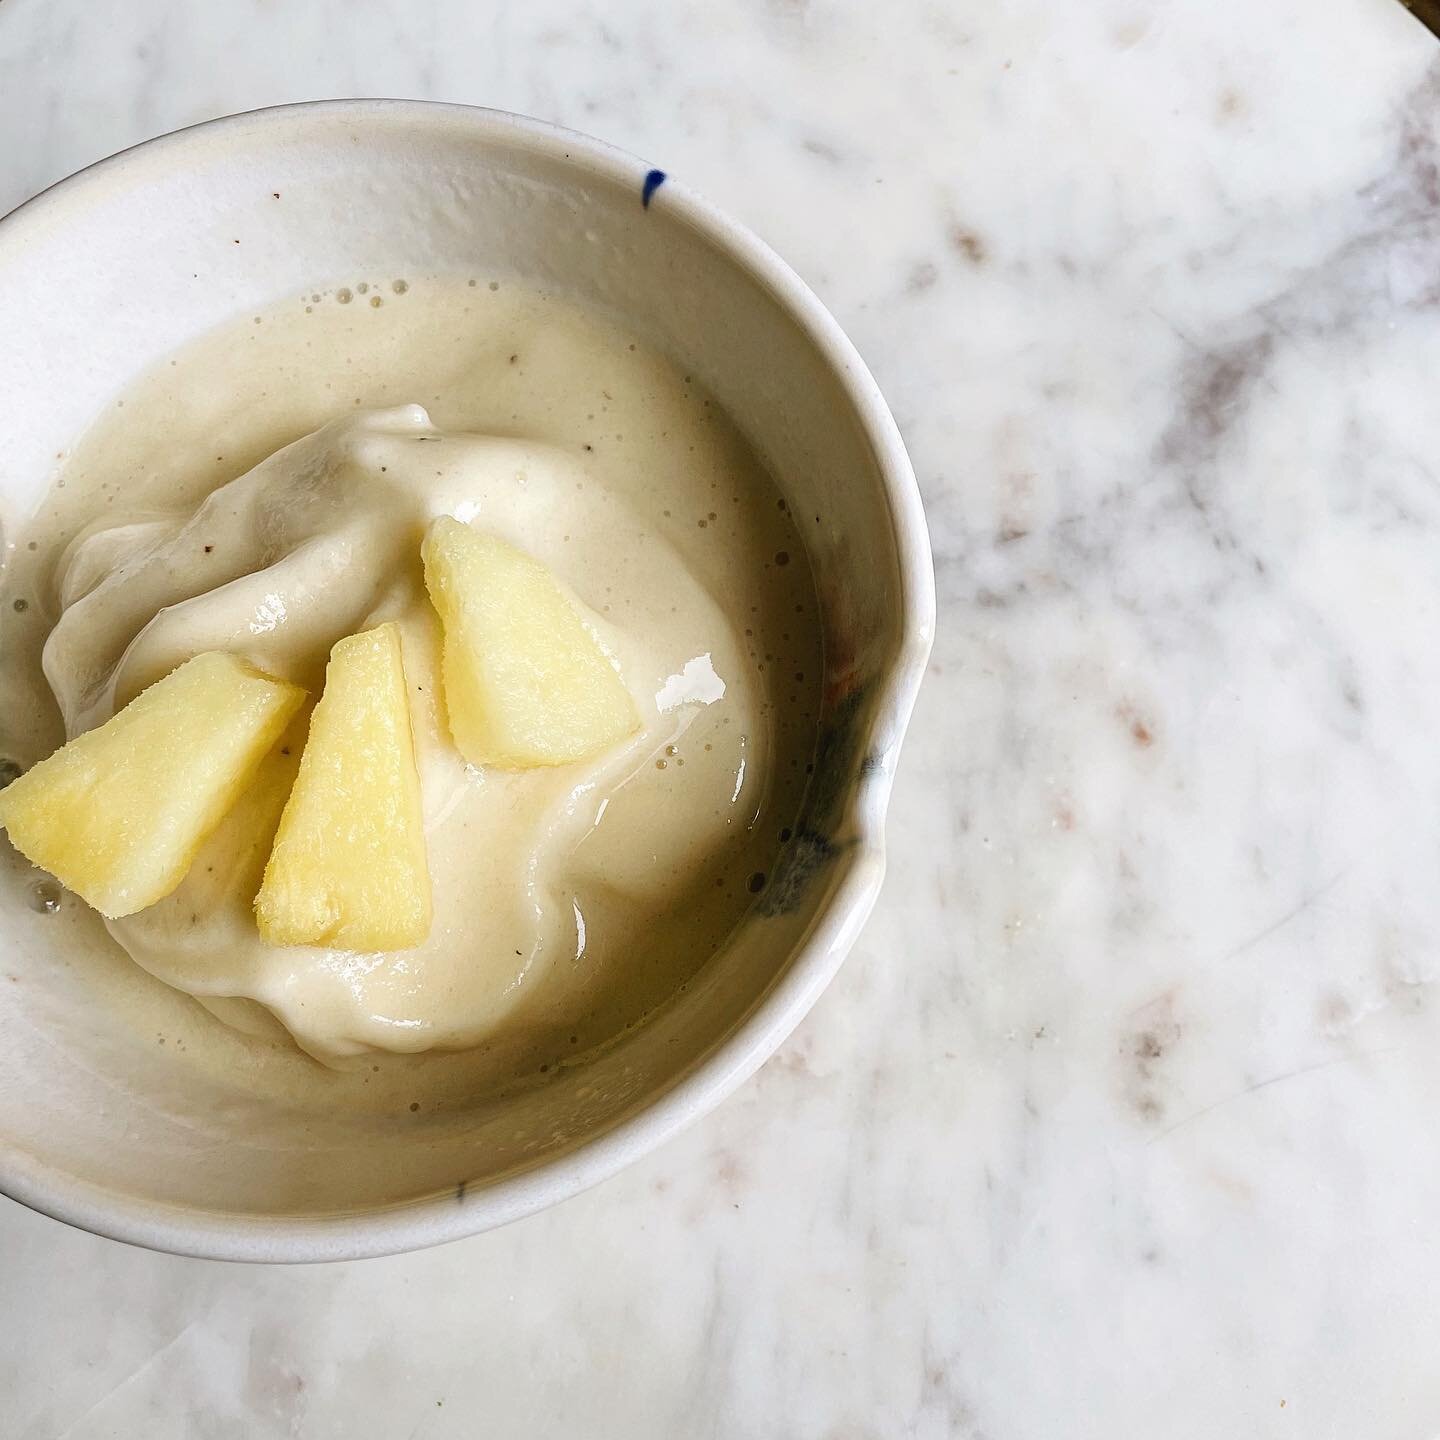 Dole Whip 💛🍍
Gosh that pineapple sugar ice cream explosion is insane. I created a pretty close comparison that won&rsquo;t give you that sugar crash but will have you reminiscing of Disneyland!

&bull;
&bull;
&bull;
&bull;
&bull;
#rawfooddiet #rawf